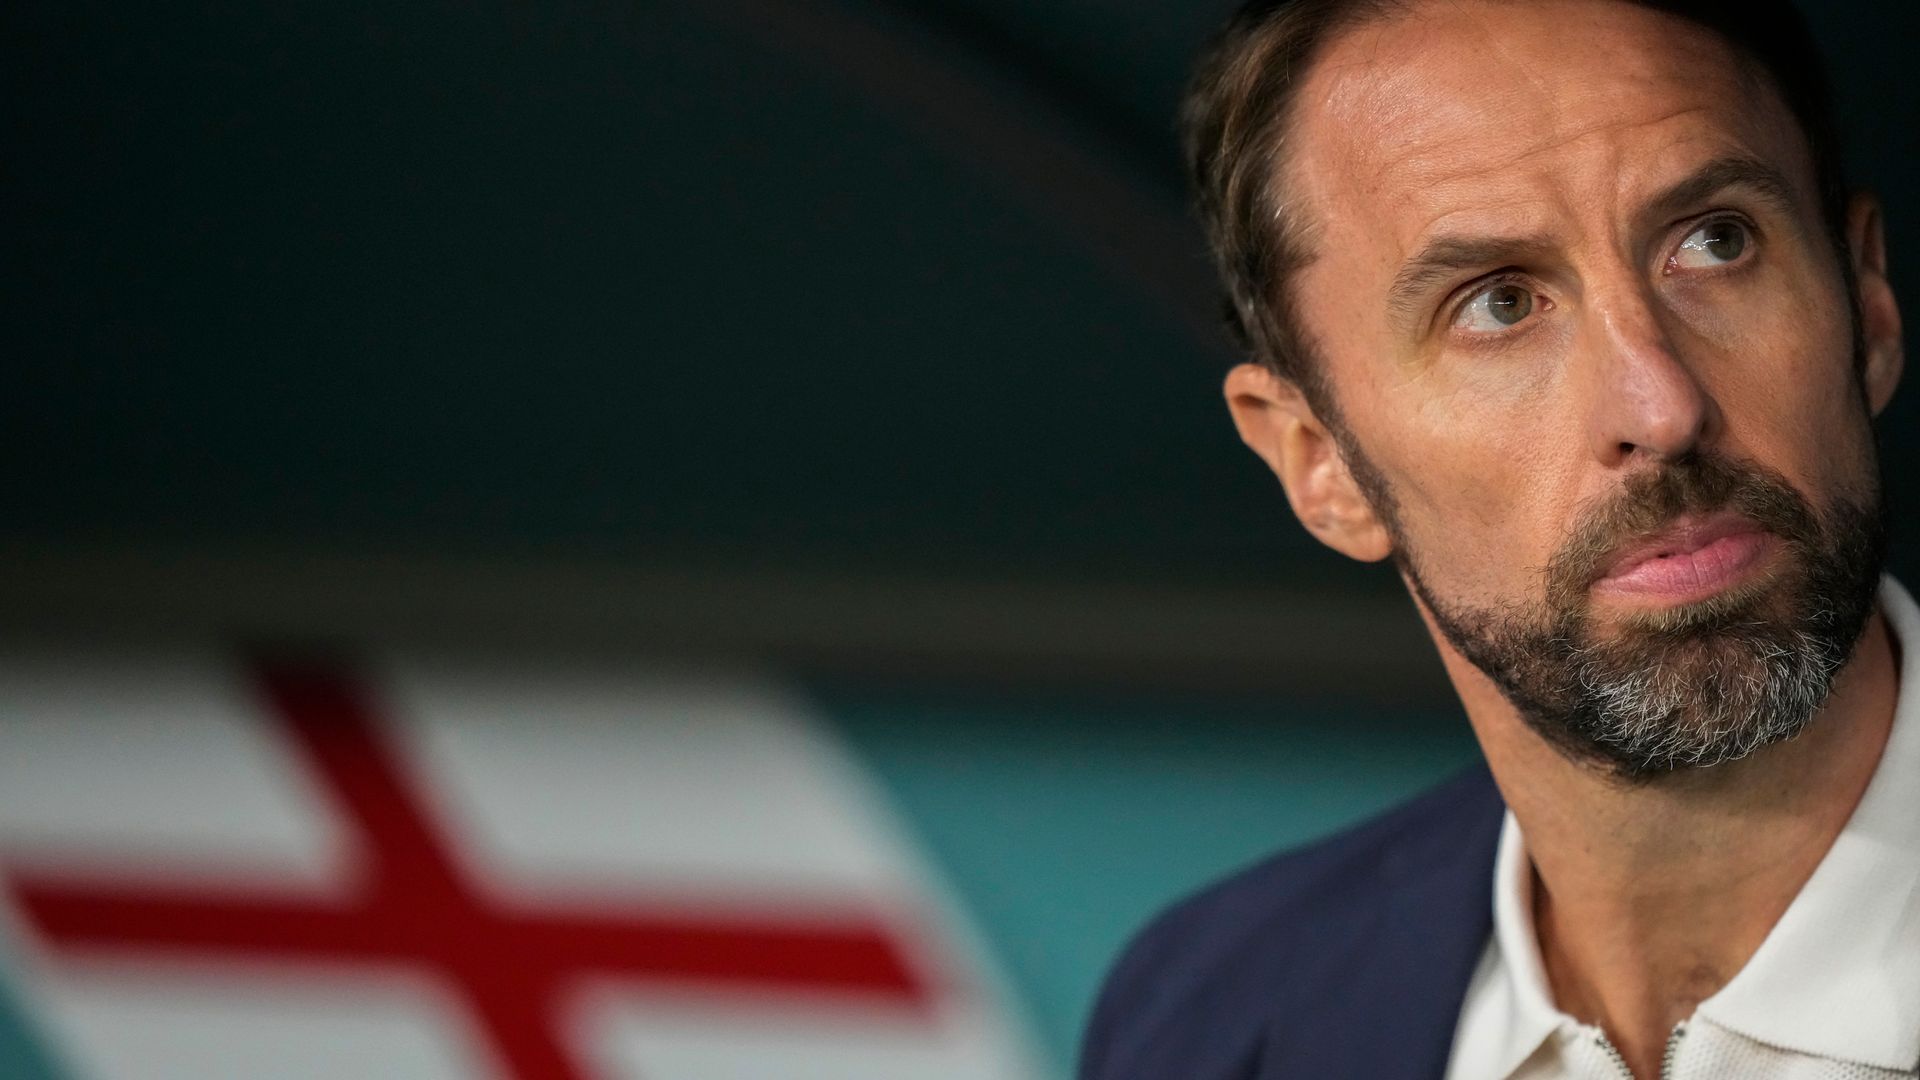 Southgate considering England exit